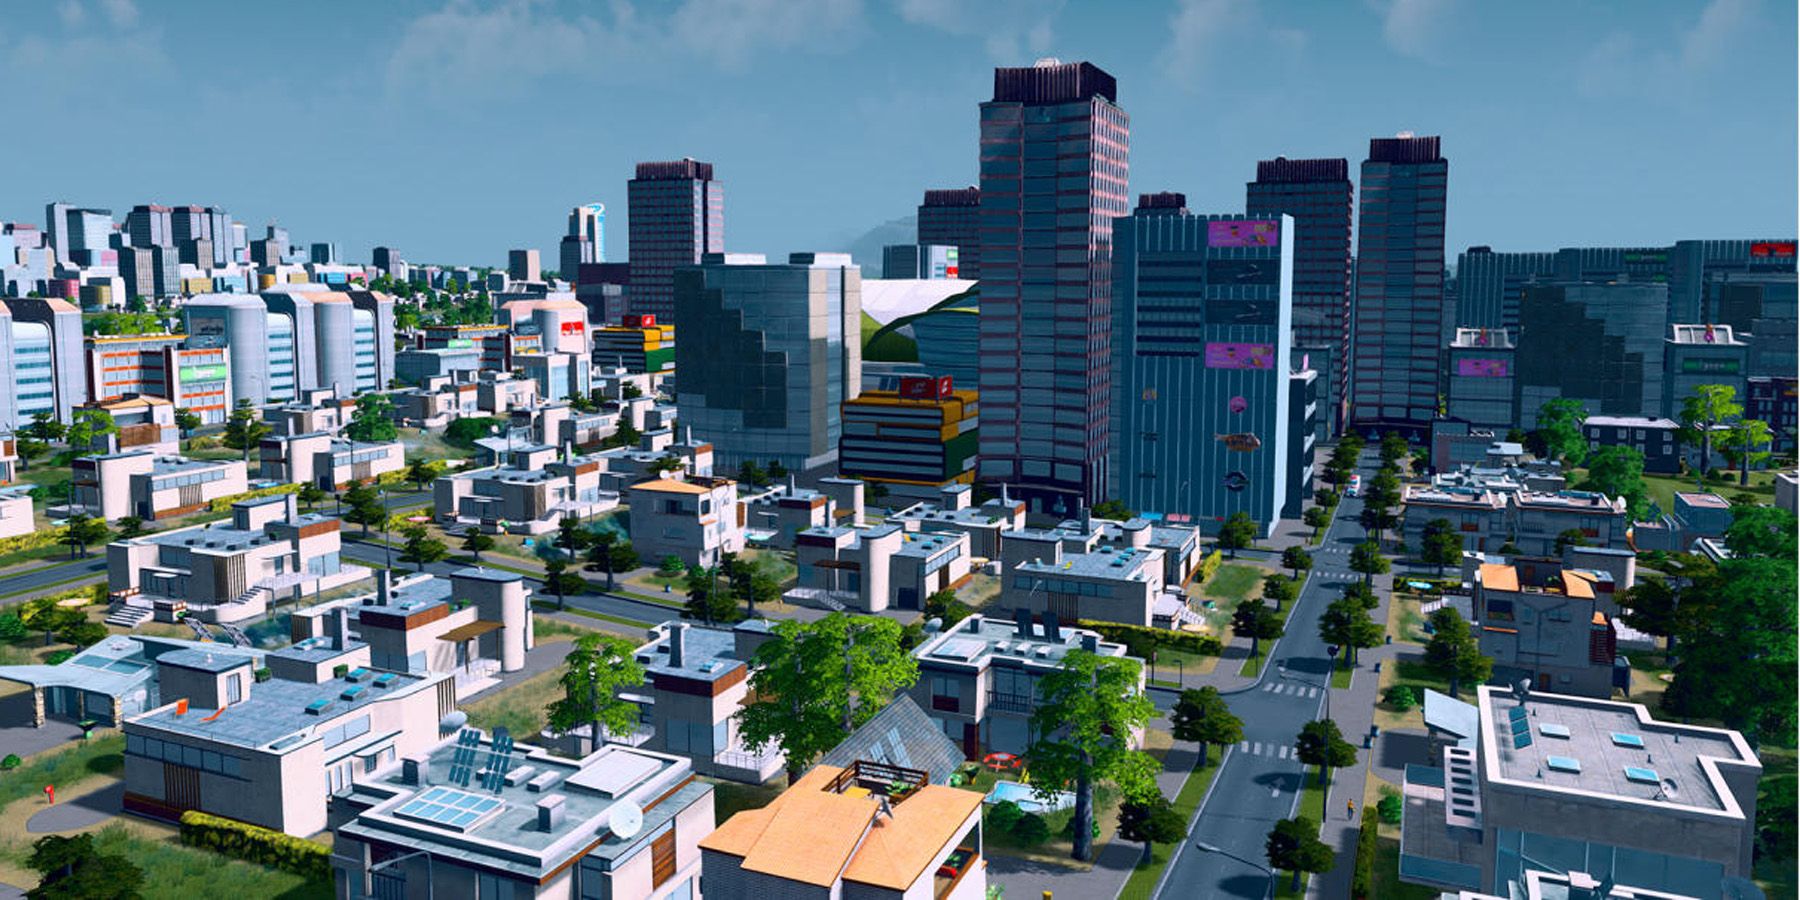 Cities Skyline 2 Lacks a Crucial Piece of the Puzzle to Repeat the  Original's Success